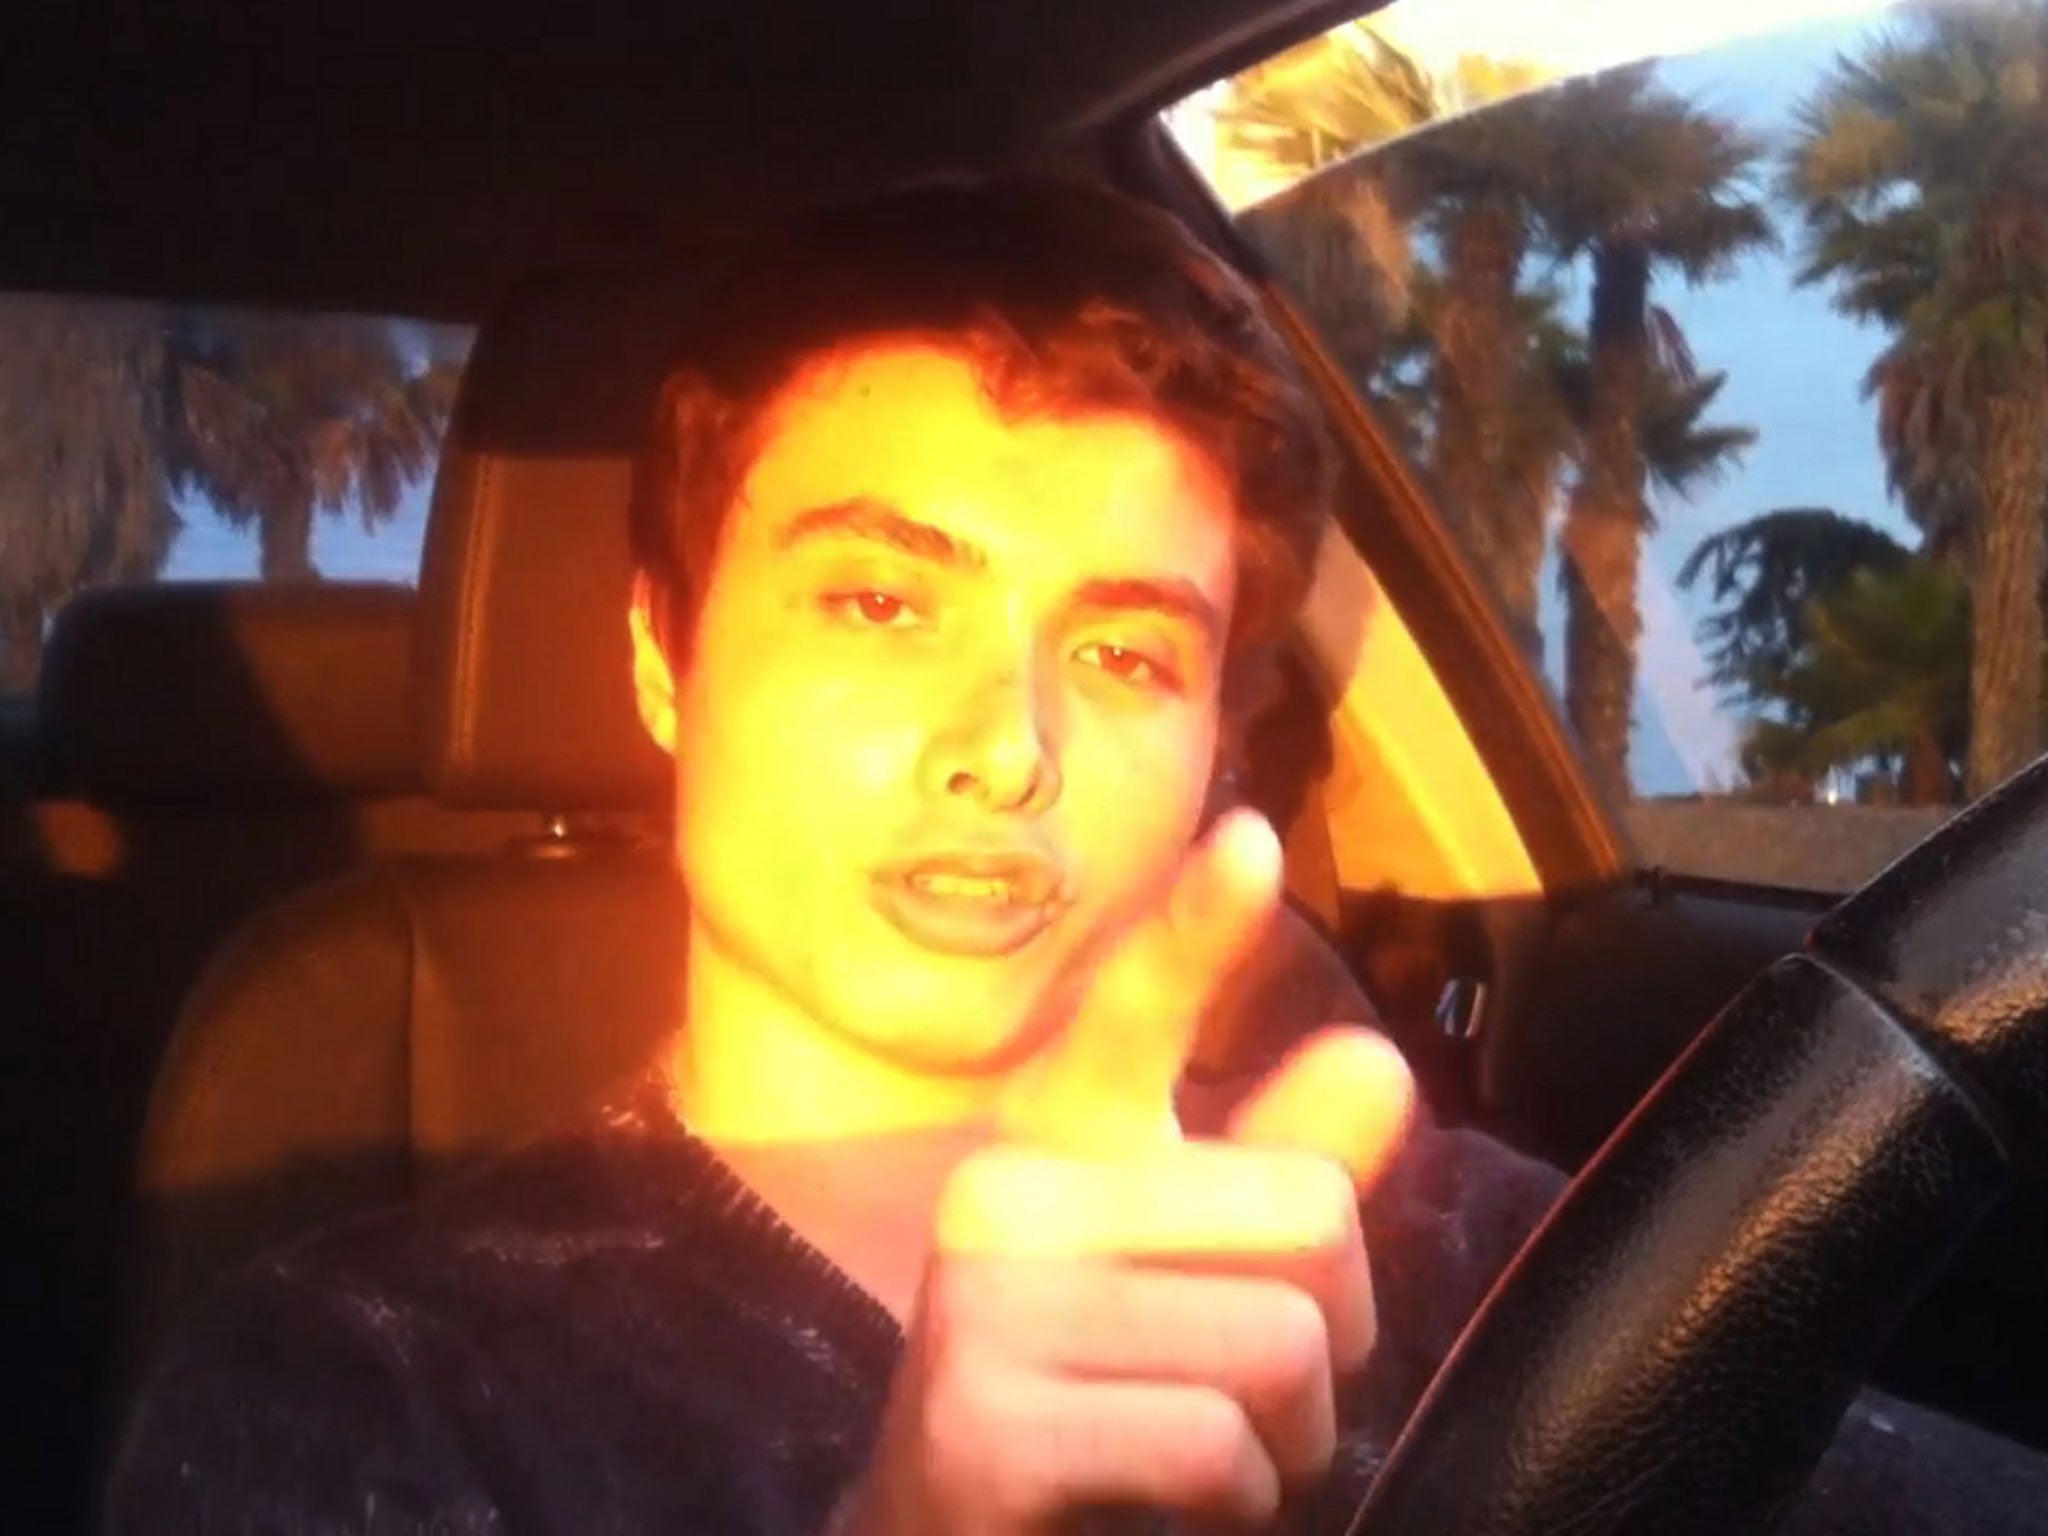 Elliot Rodger made a video justifying his rampage